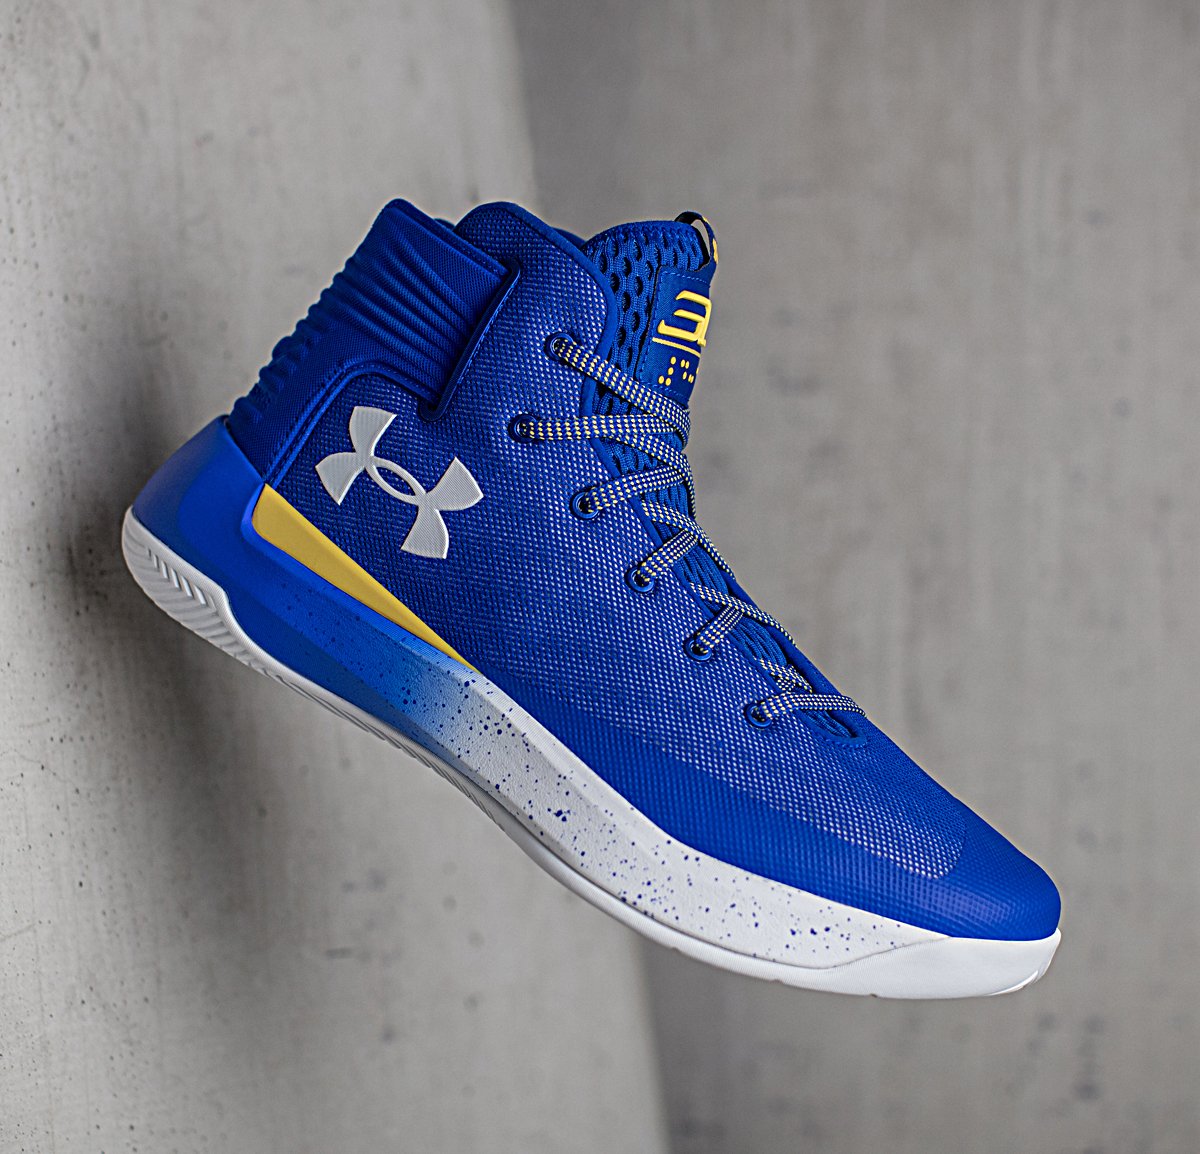 Under Armour Curry 3Zer0 Playoff Shoe 